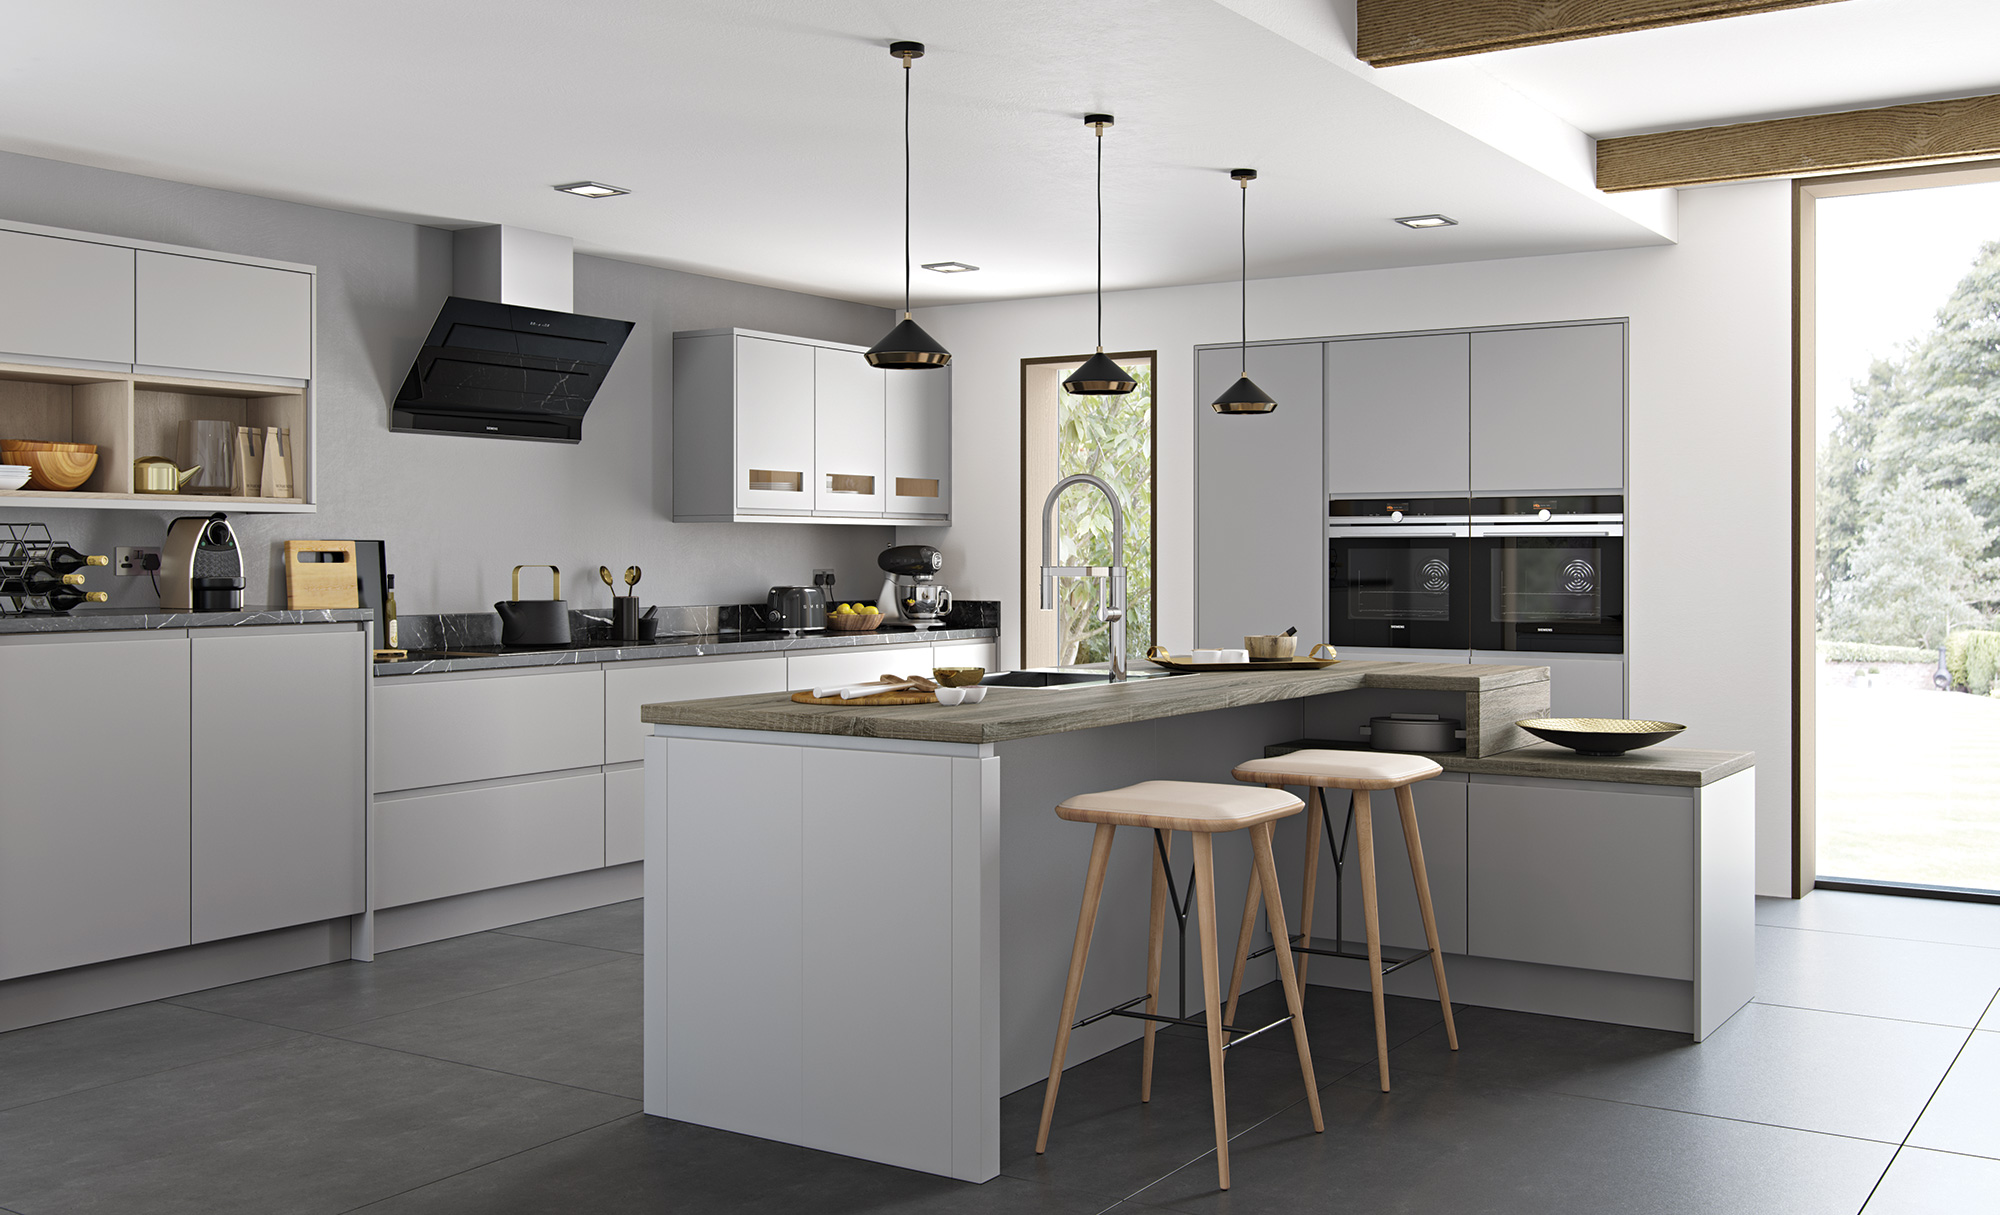 A Uform kitchen in grey and white